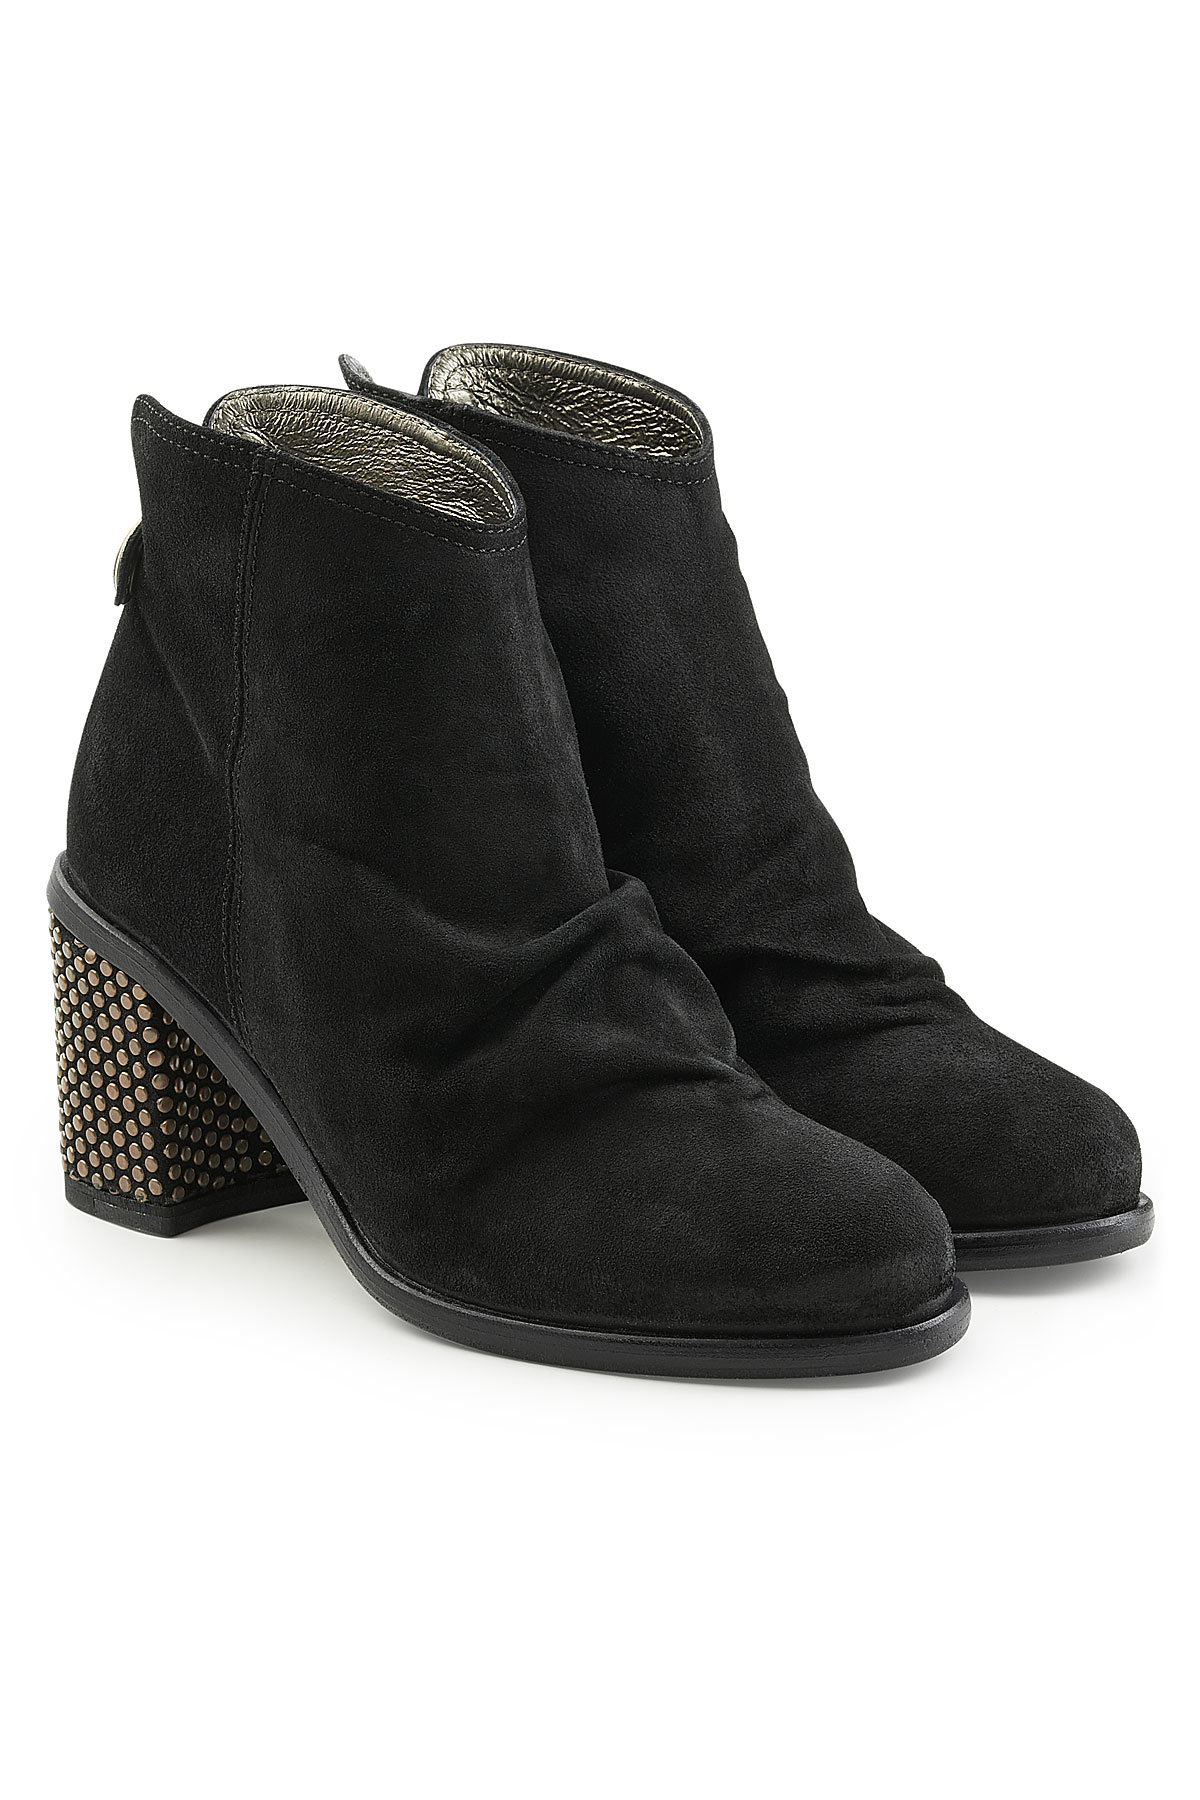 Fiorentini + Baker - Suede Ankle Boots with Platform